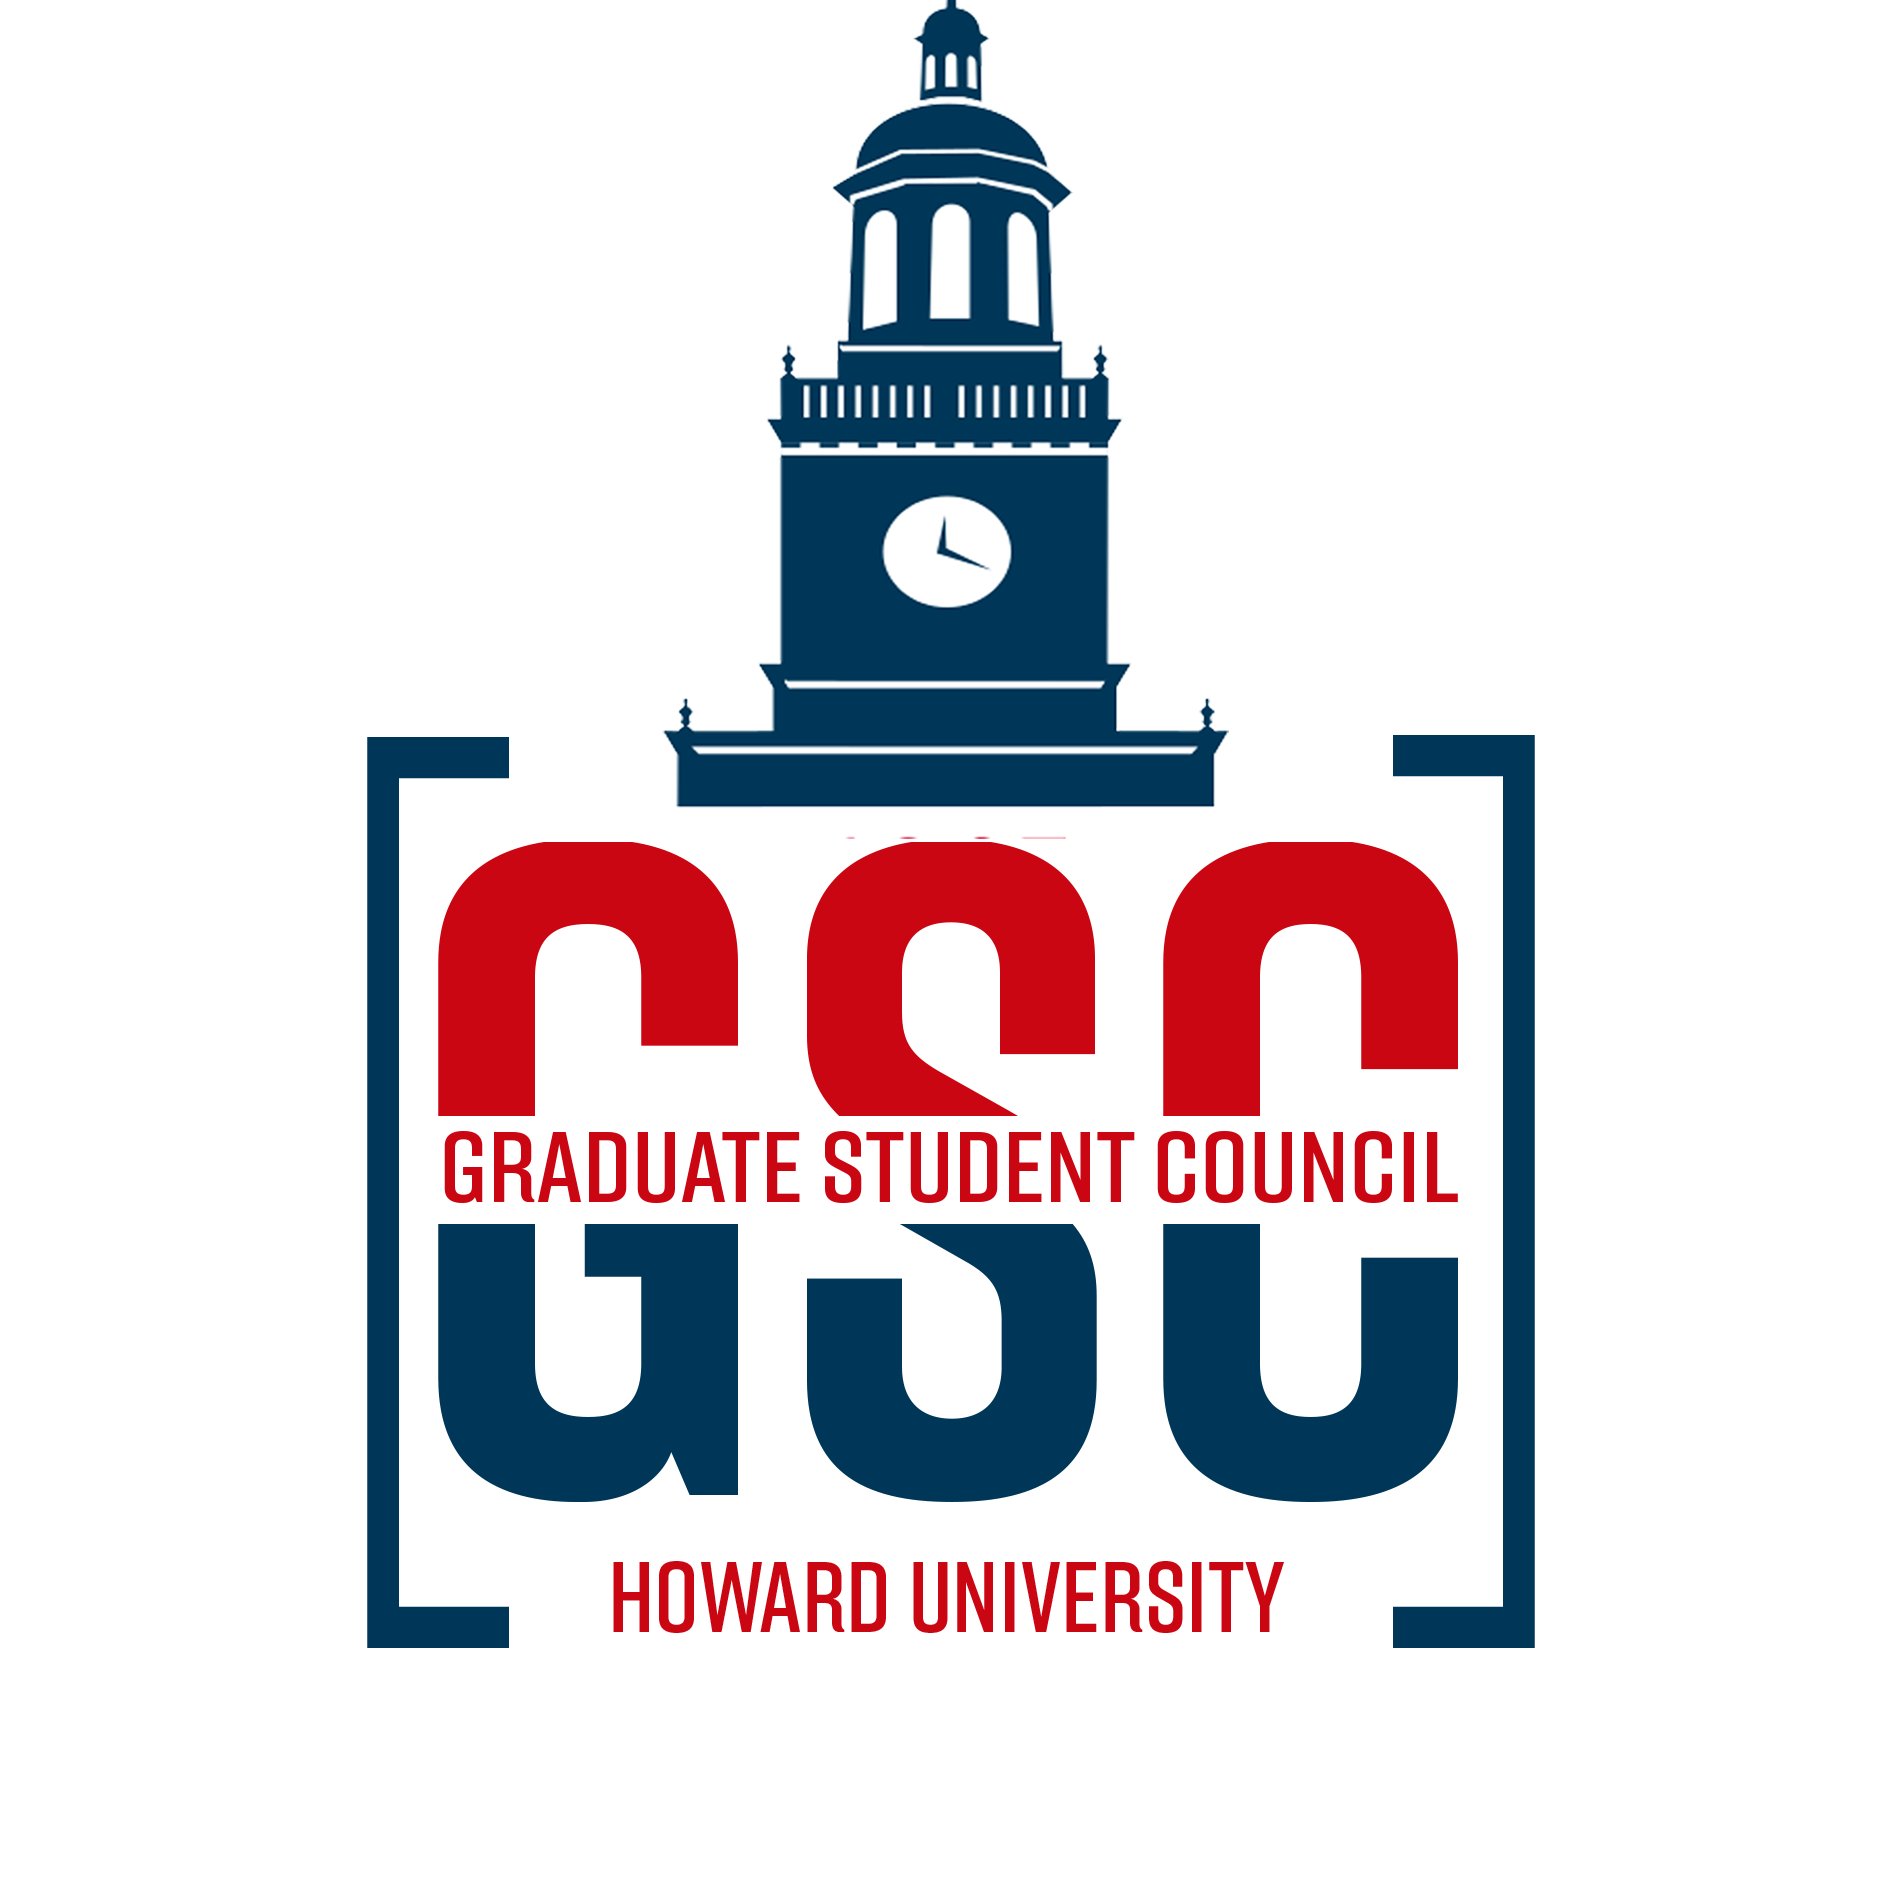 The GSC represents the interests of the graduate and professional students at Howard University